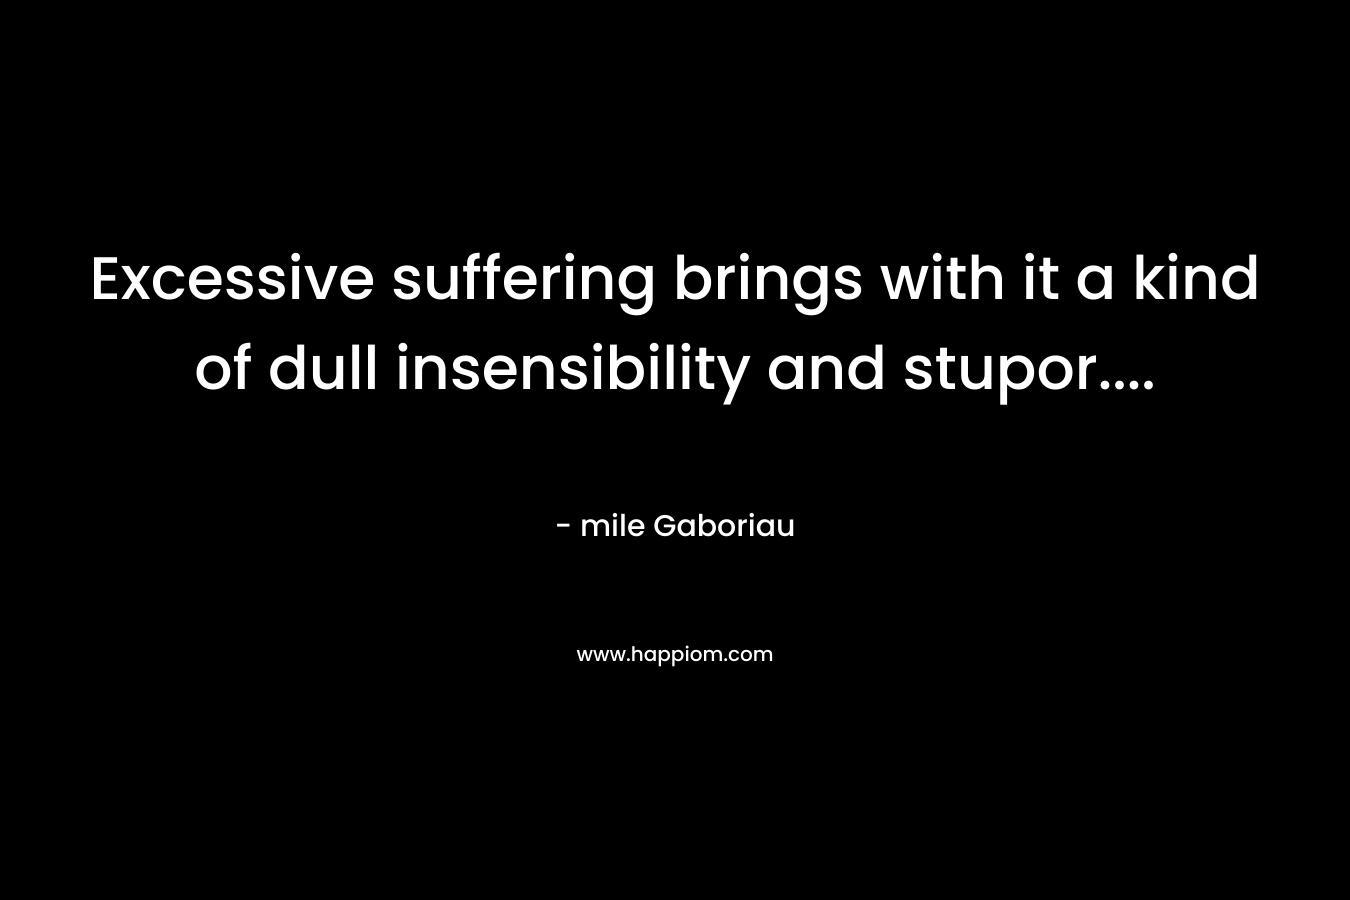 Excessive suffering brings with it a kind of dull insensibility and stupor....